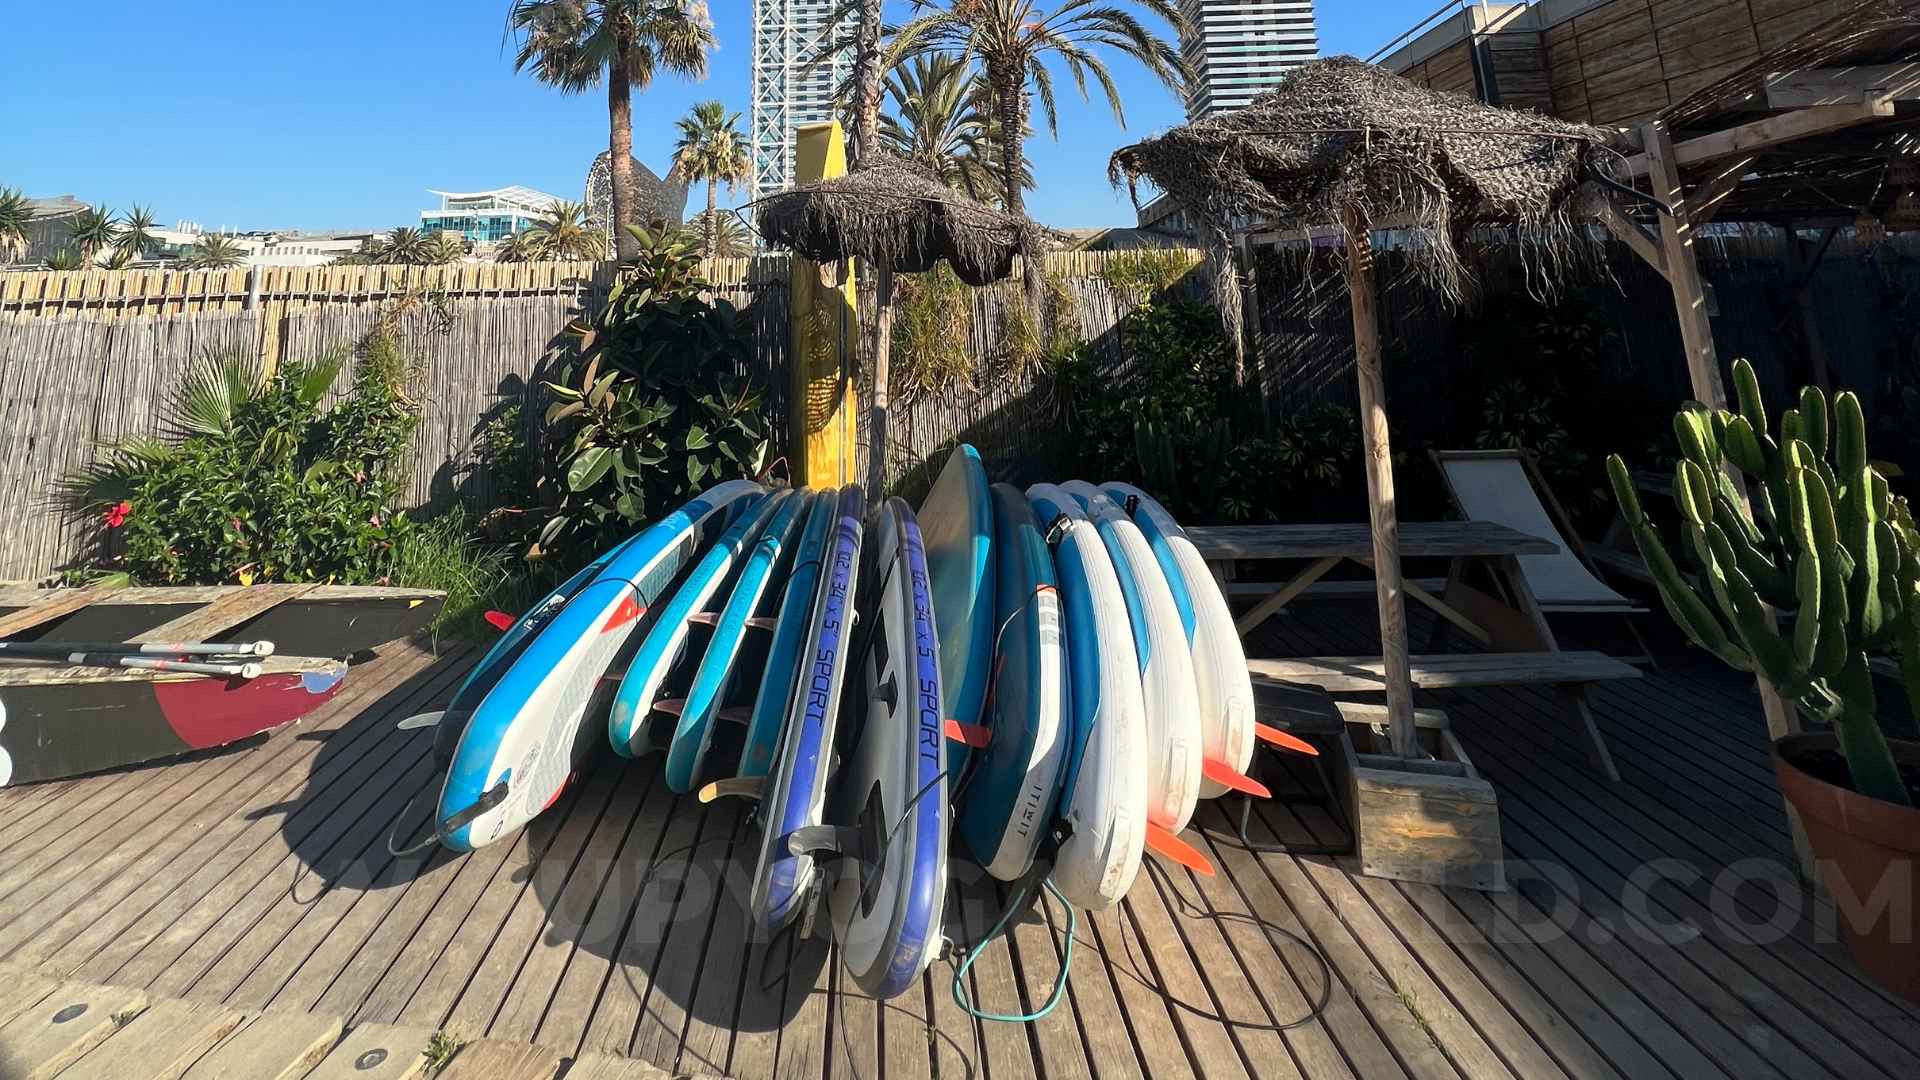 Boards for SUP YOGA practice